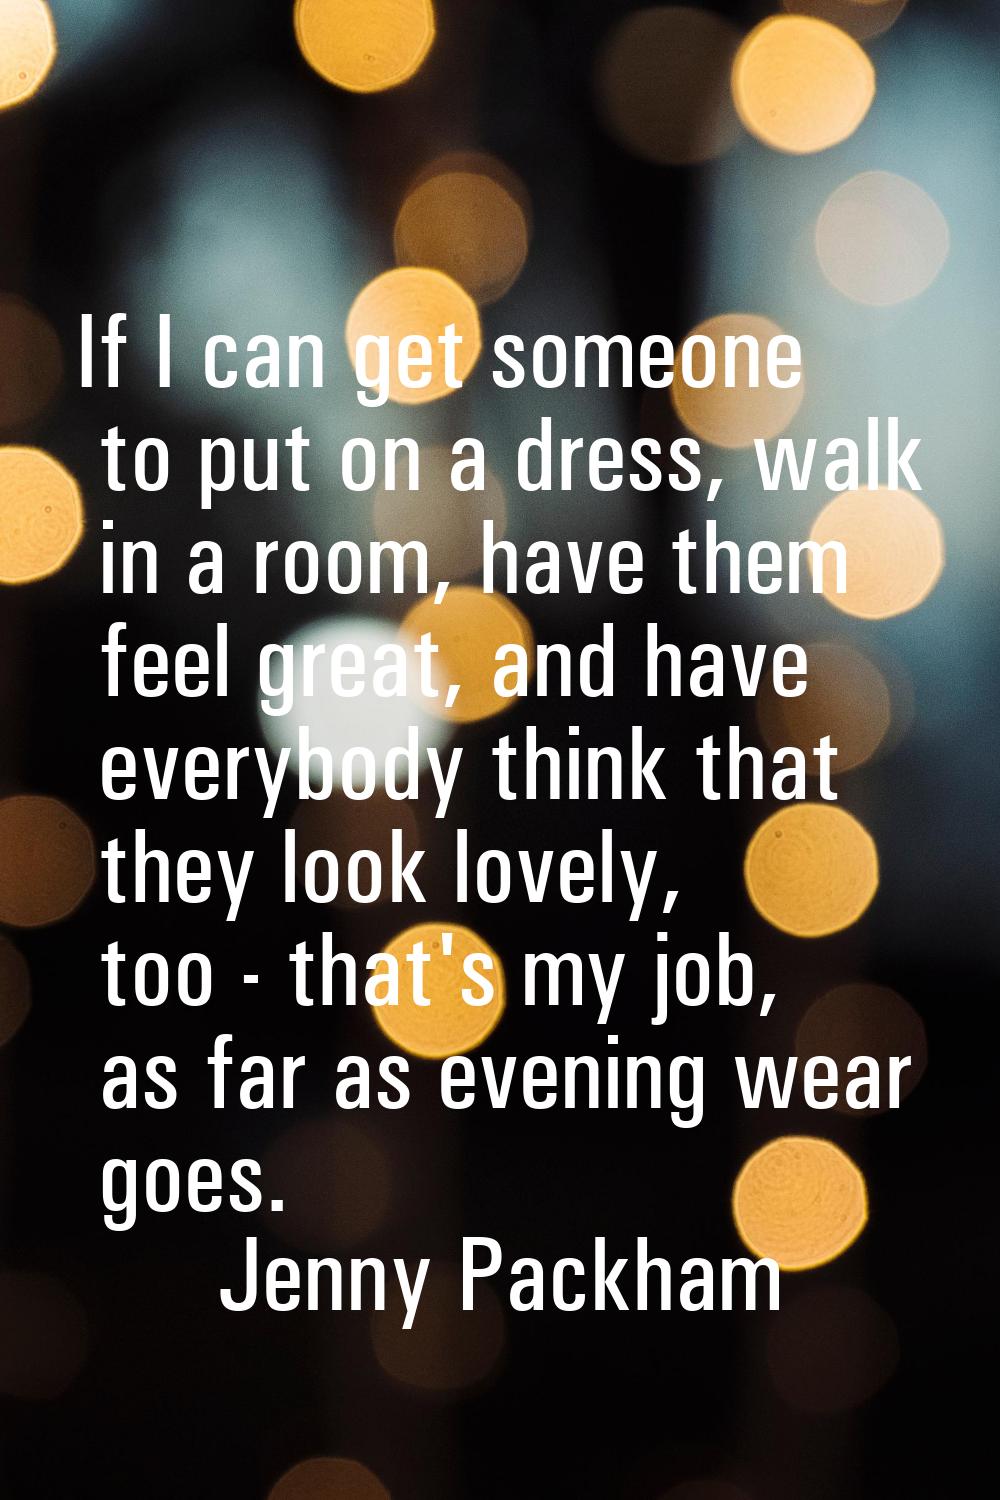 If I can get someone to put on a dress, walk in a room, have them feel great, and have everybody th